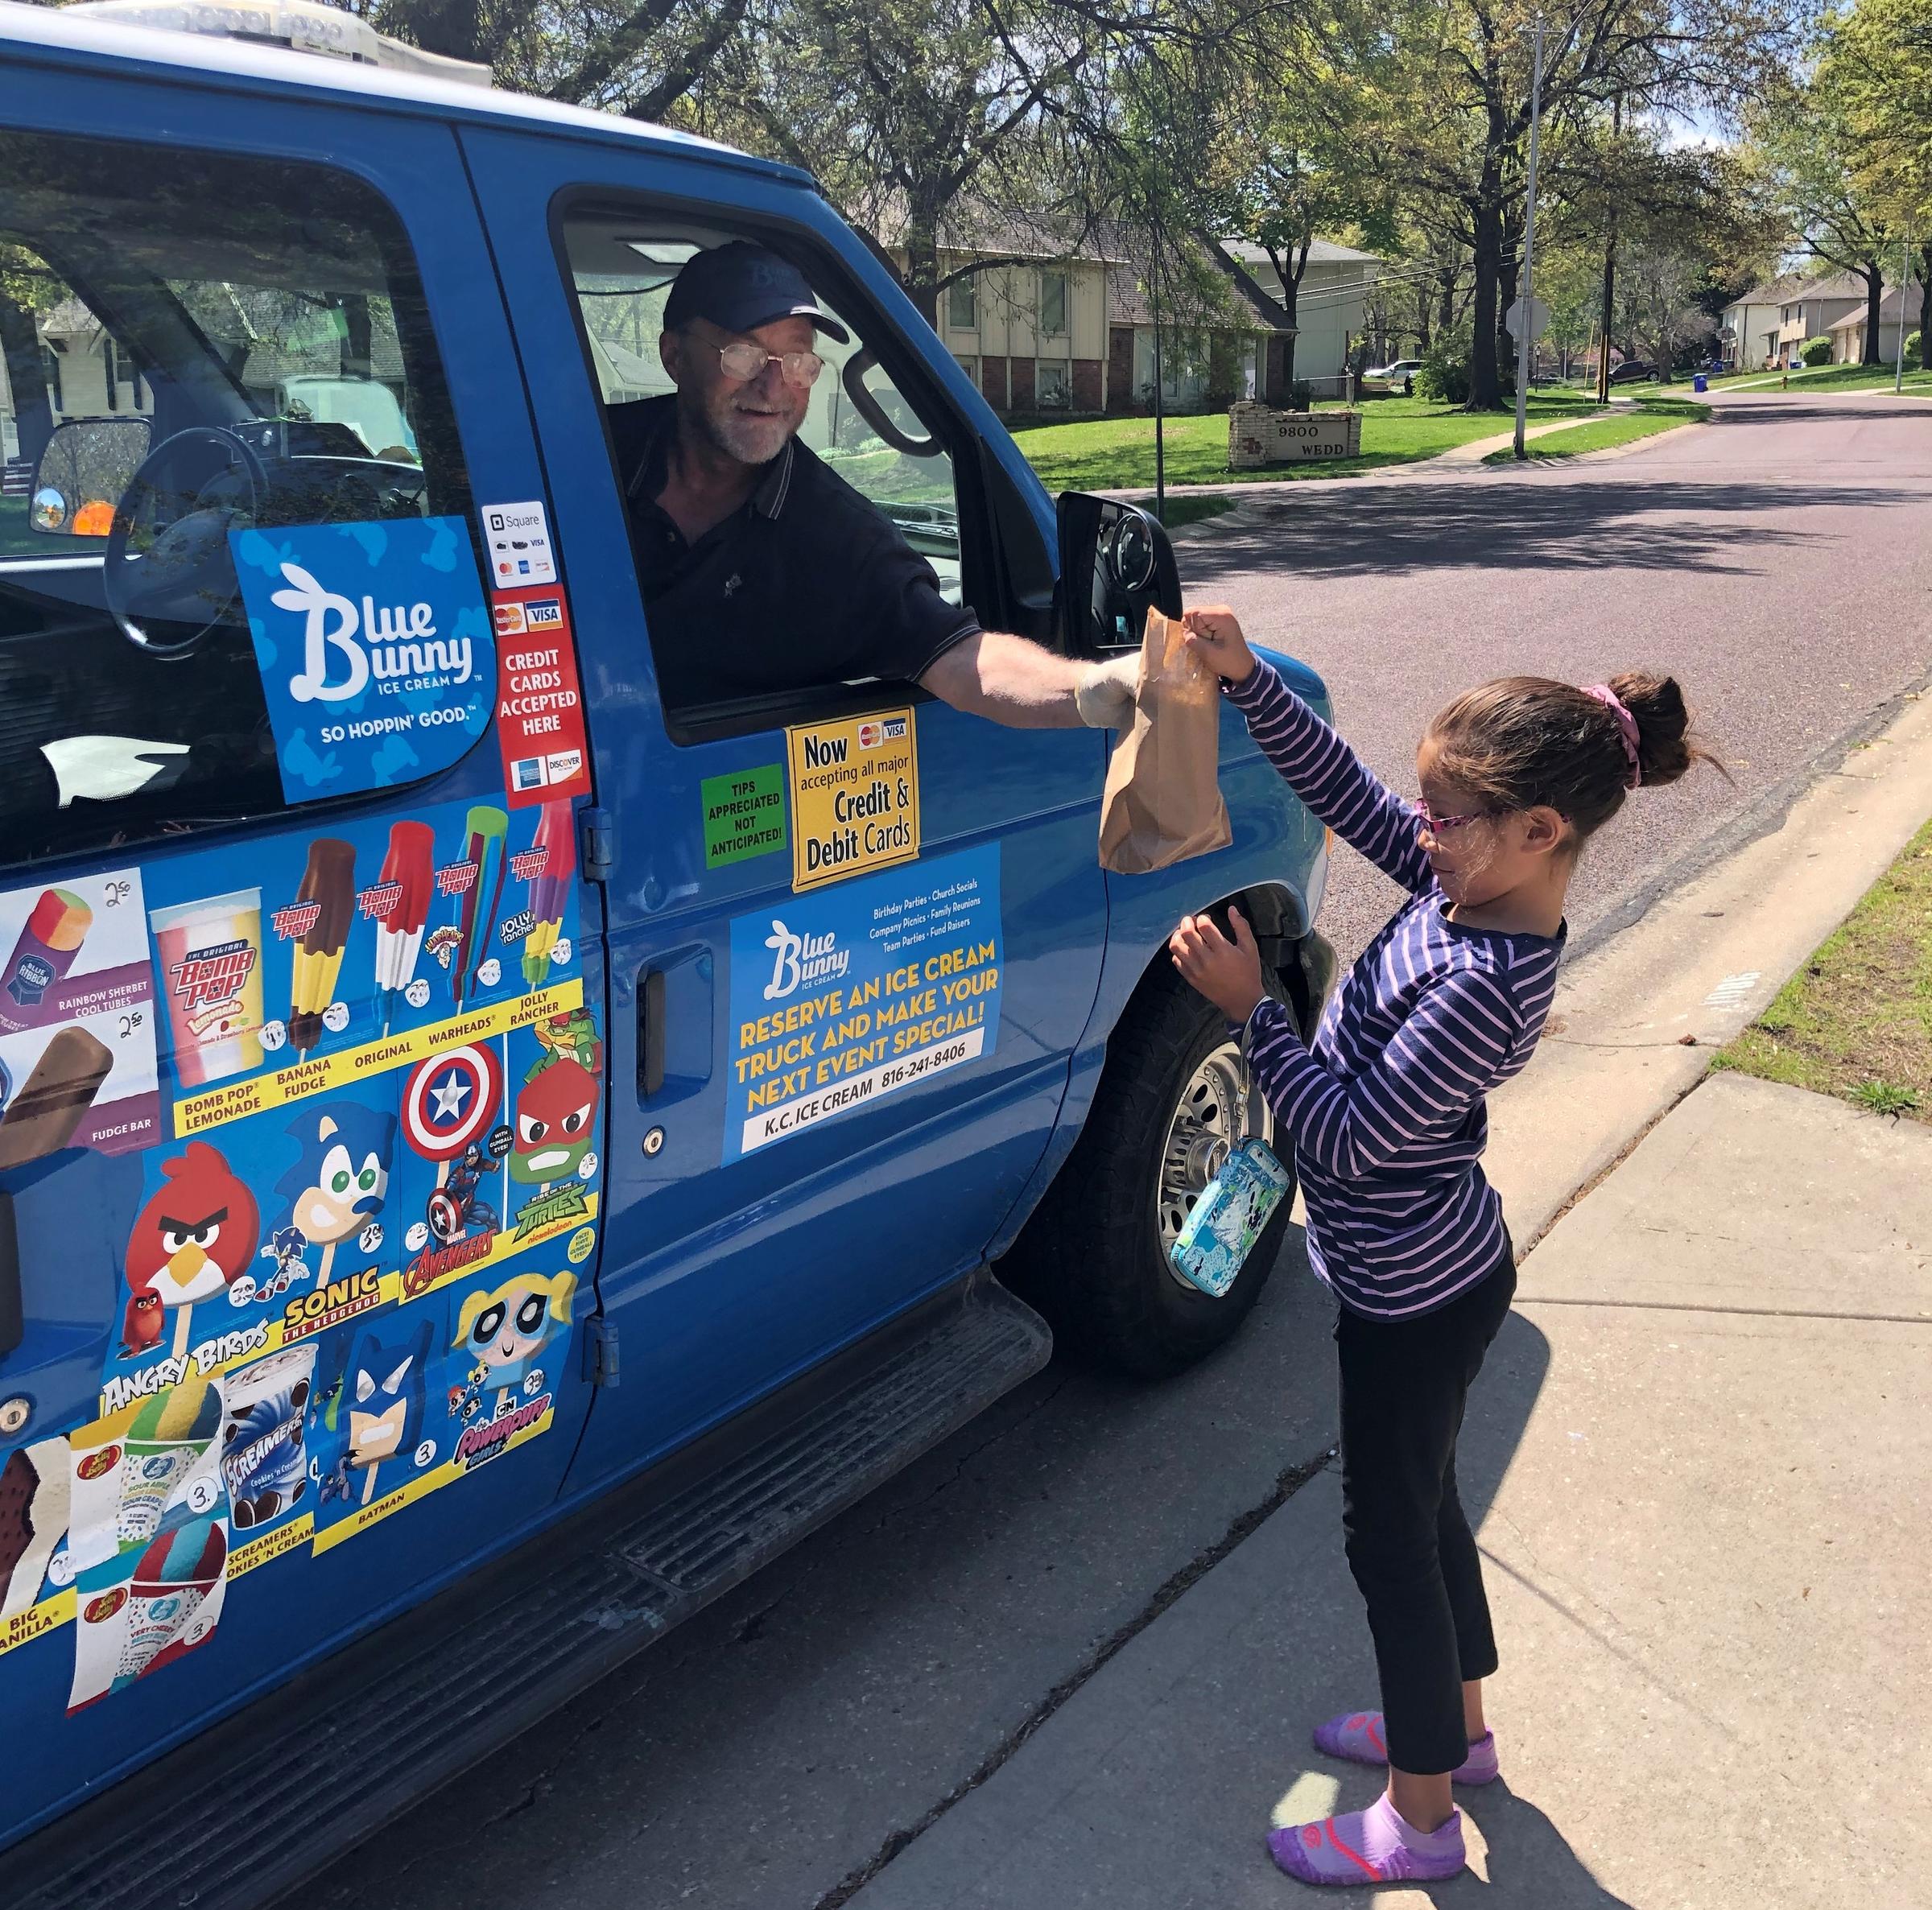 For Some In Overland Park Ice Cream Truck S Jingle Is Sweet Pandemic Relief But For Others It S Ca Kbia